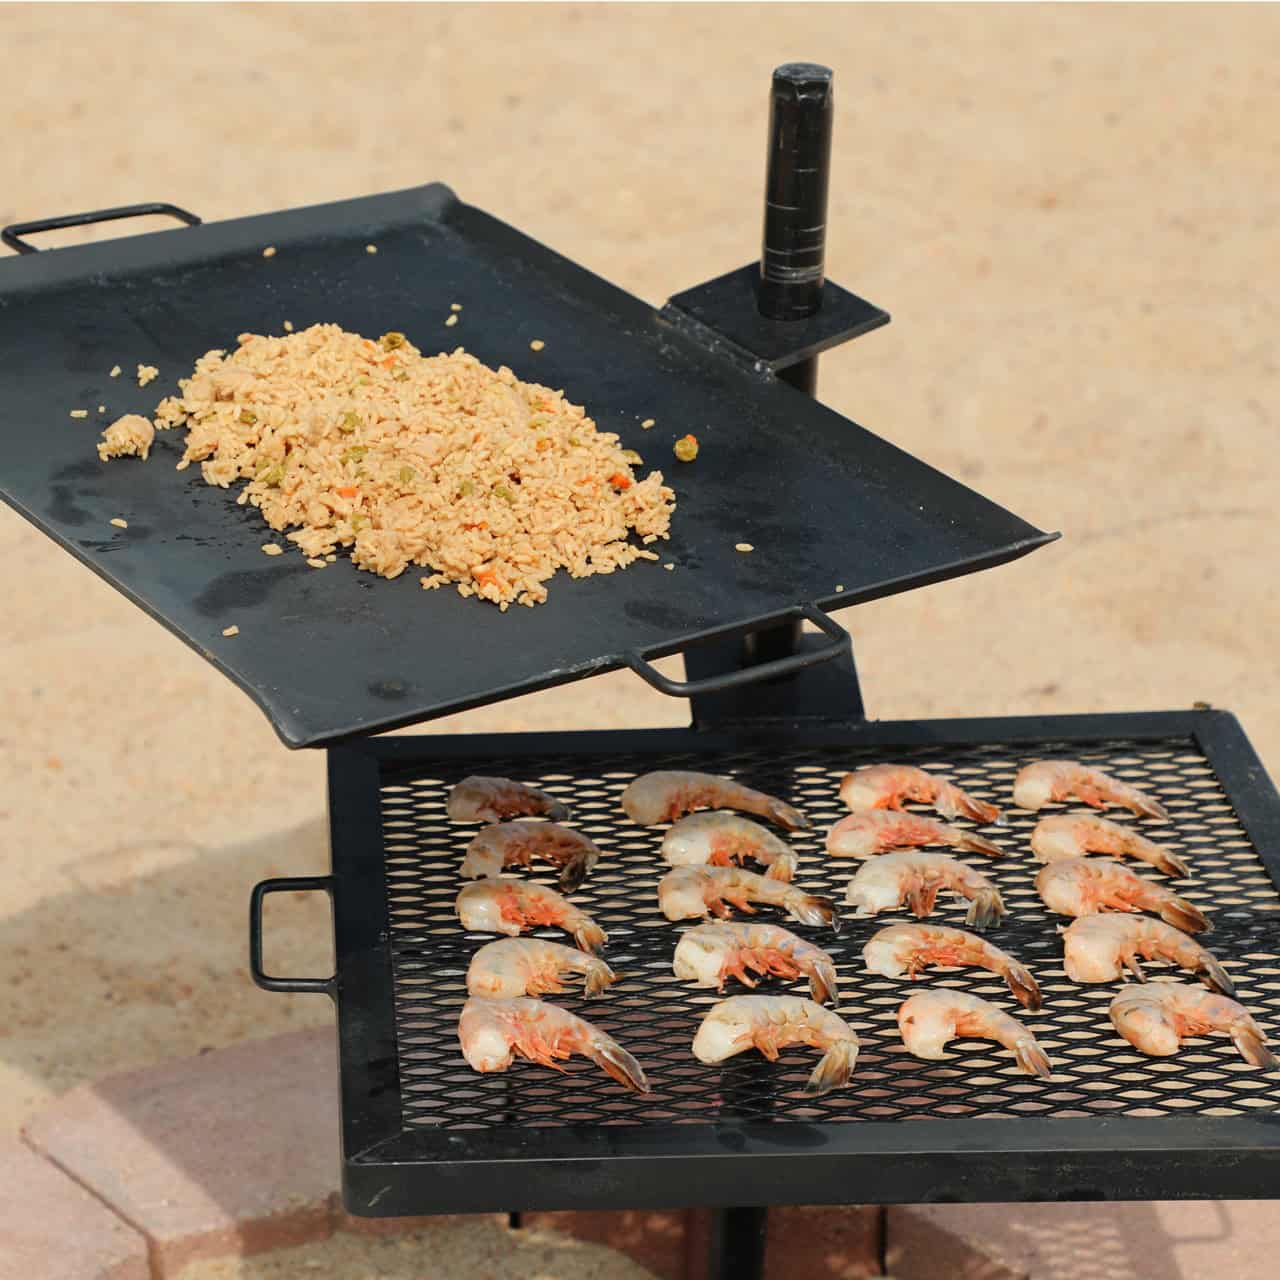 https://www.cancooker.com/wp-content/uploads/2020/03/products-639A6189---shrimp--rice-at-beach__86436.1584965775.1280.1280.jpg